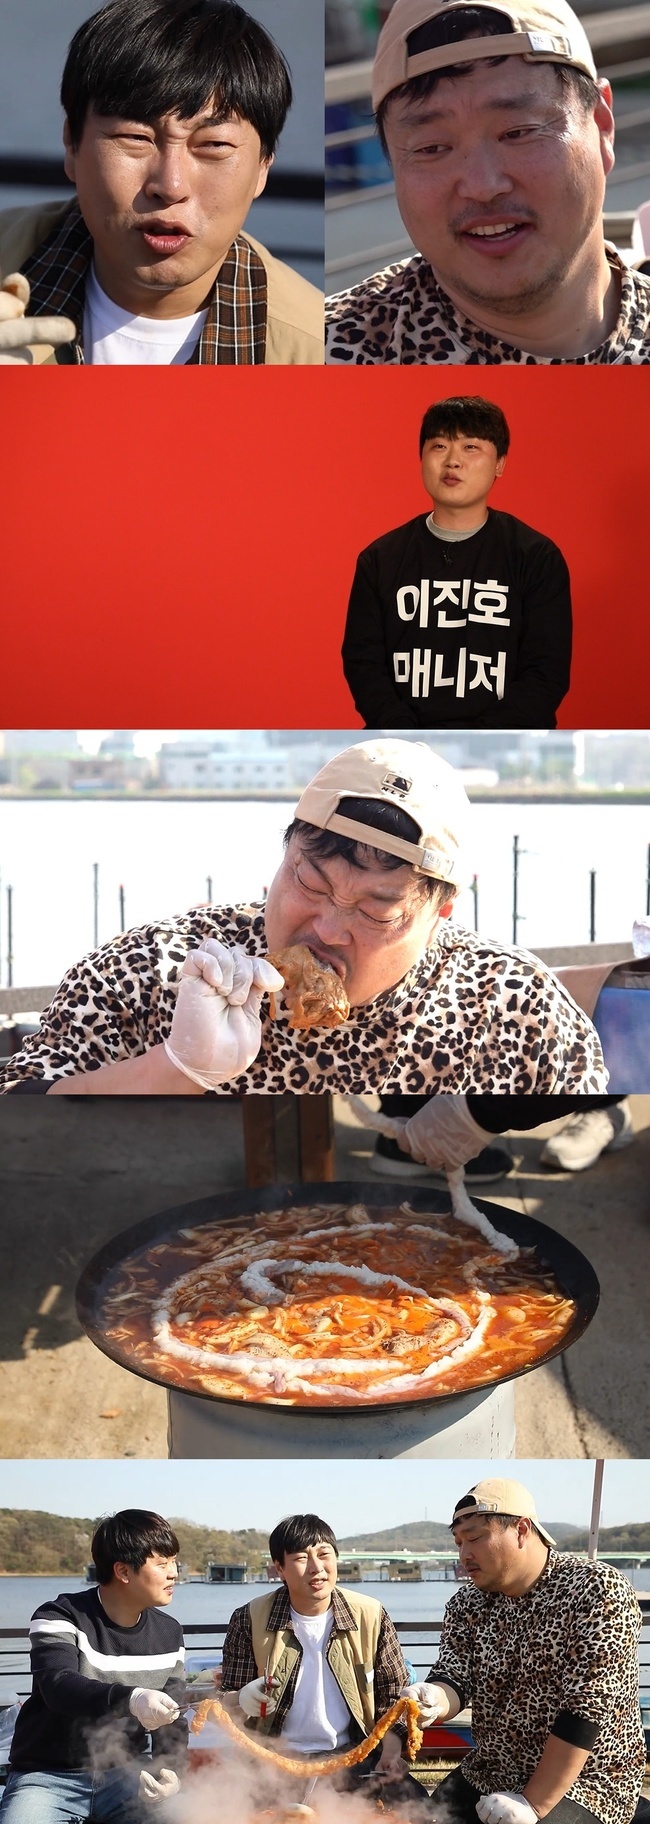 Comedian Lee Jin-ho and YouTuber Bob Gupnam met.MBC Point of Omniscient Interfere (planned by Park Jung-gyu / directed by Noh Si-yong, Chae Hyun-seok / hereinafter Point of Omniscient Interfere) will be broadcast on May 1, and a pleasant day of gag idol Lee Jin-ho and YouTube star Bob Gup Nam will be drawn.Lee Jin-ho has a surprise meeting with Bob Gup Nam on the day; it turns out Lee Jin-ho Manager was a Super Real fan of Bob Gup Nam.Manager, who became a successful virtue, was delighted that he could not keep his mouth shut at the reception of the real thing.In addition, an unexpected entertainer appeared in the meeting with Bob Gup Nam on the day, and the entertainer was said to have missed the soul of Lee Jin-ho and Bob Gup Nam with a huge personal and enthusiastic appearance.The identity of Lee Jin-ho and the entertainer who possessed the bob is curious.Then there was the Sanjeok Cuisine show, which was held in the bob-kup Nam-pyo legend, and both Lee Jin-ho and Manager said, Did you catch ten cows?!I can not shut up. After skillfully grooming the remaining ingredients, I pour them into the trademark large pot lid to complete the delicious Cuisine.